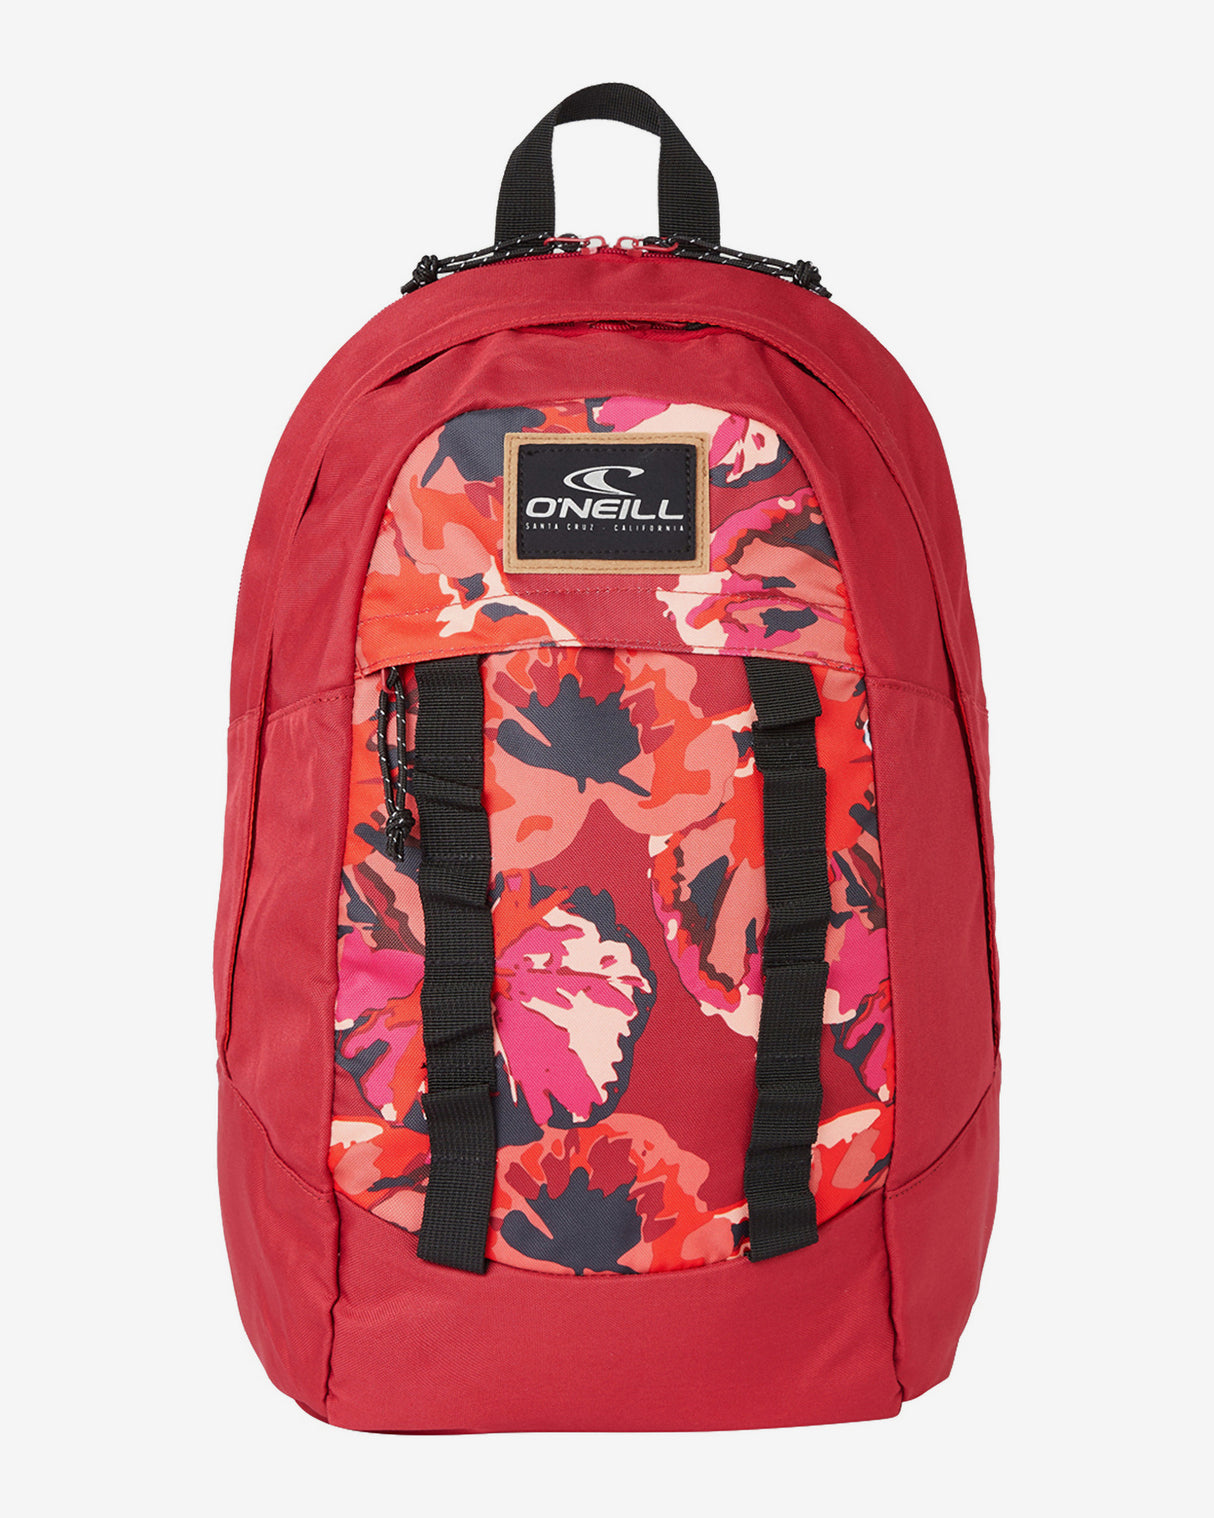 MOCHILA - BM ROUNDED BACKPACK 30L - RED AOP- INVIERNO 2021